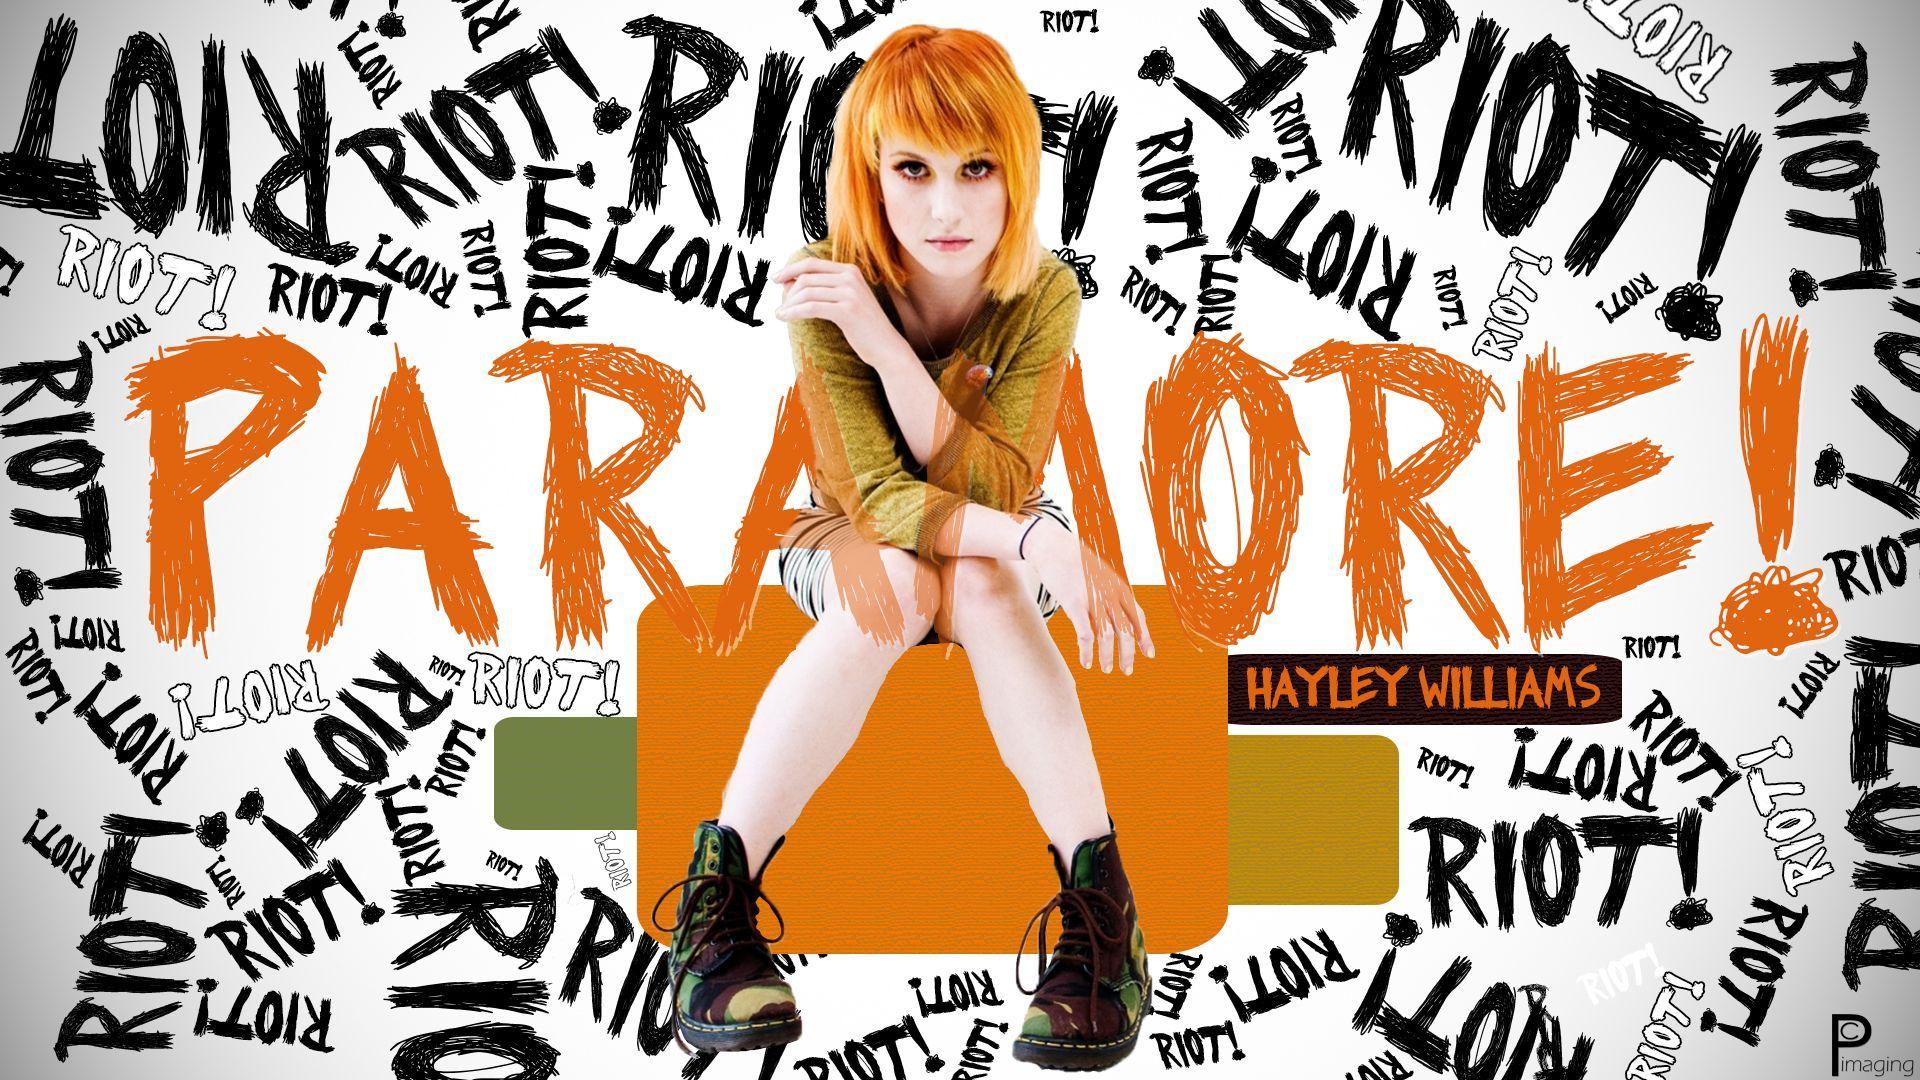 Hayley Williams from Paramore. Riot. ♪ Música ♫